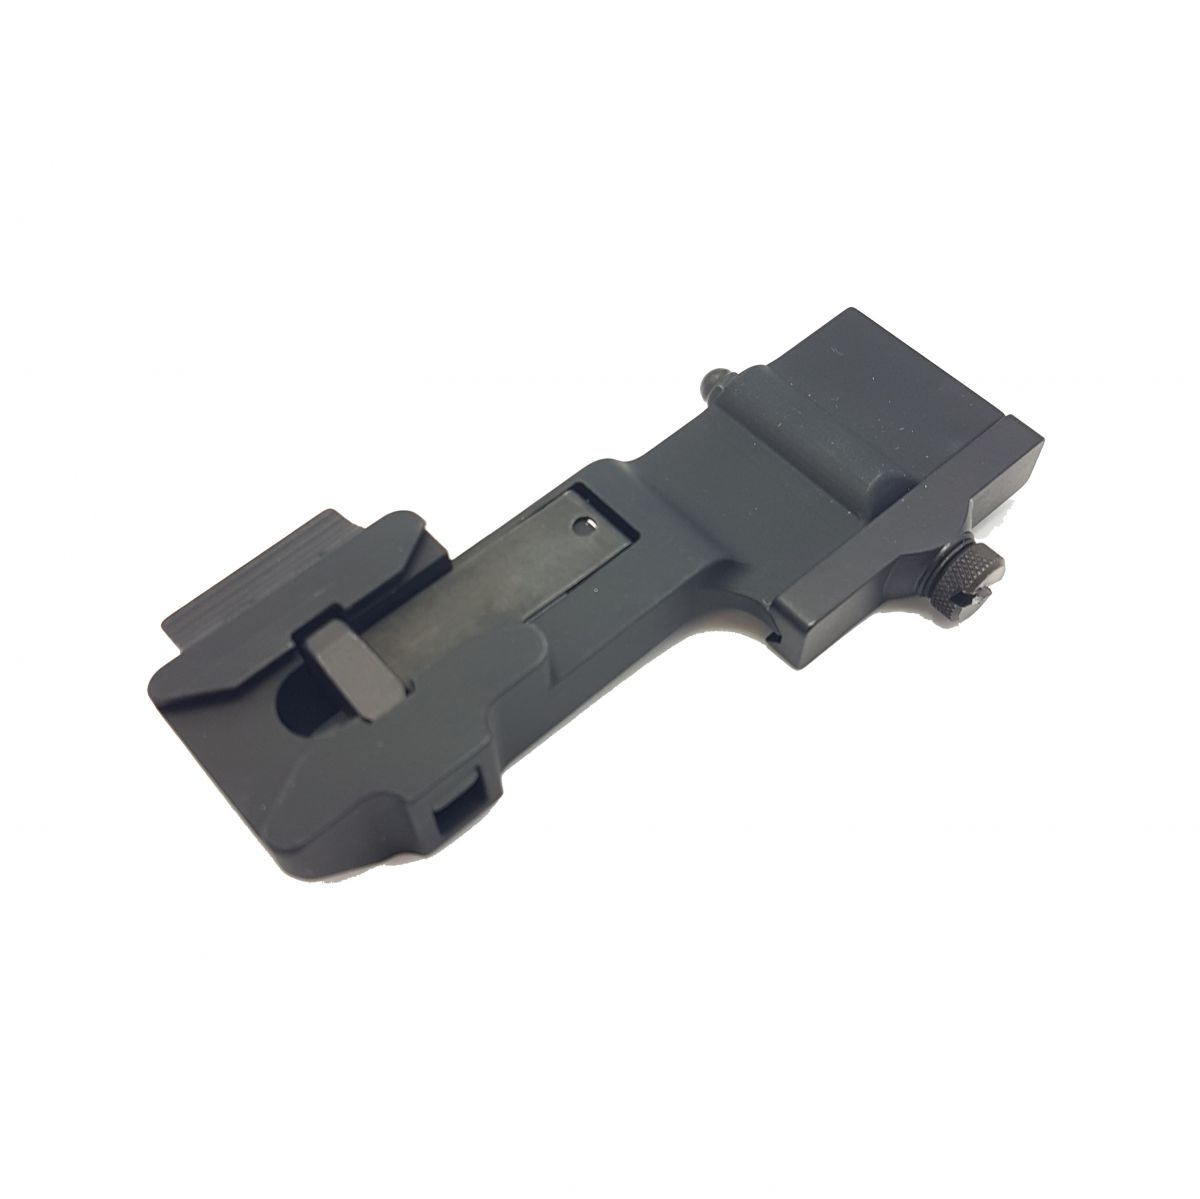 Picatinny Mount for NT940